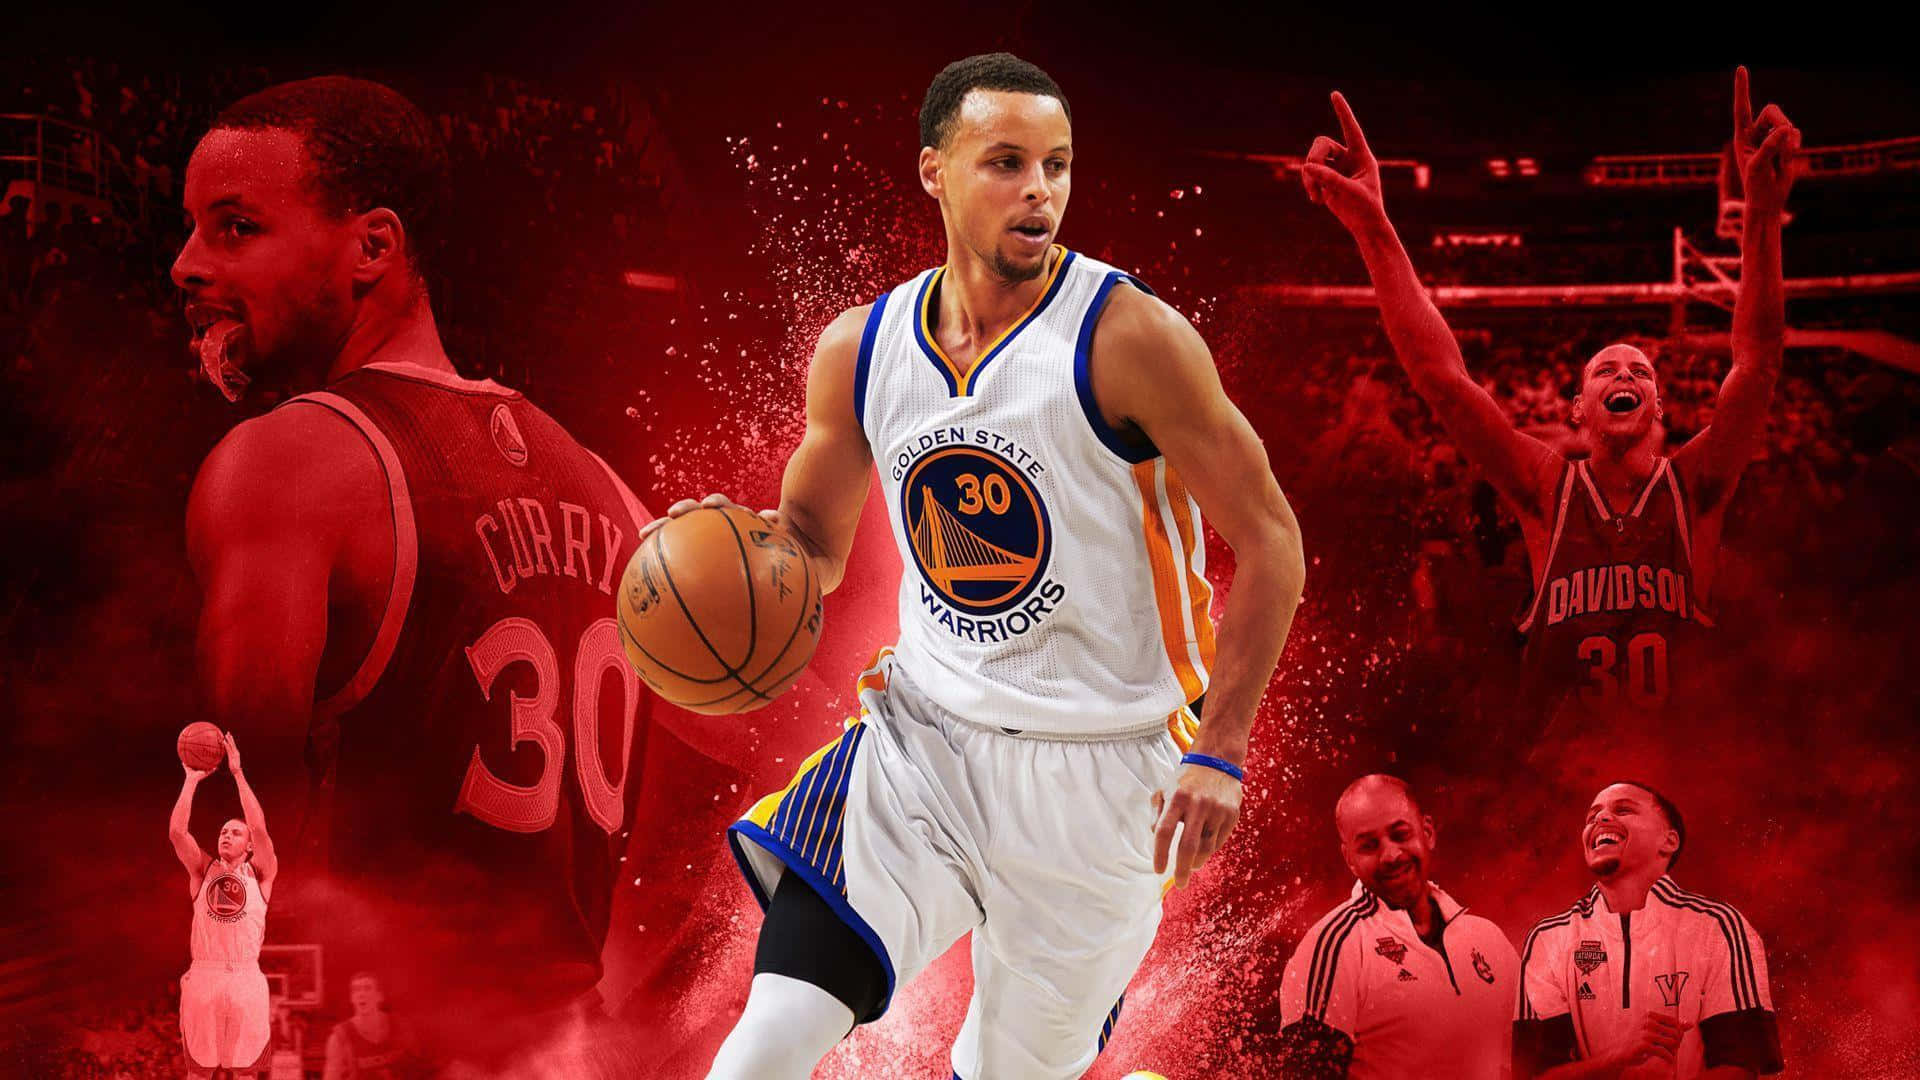 Nba 2k Stephen Curry Background